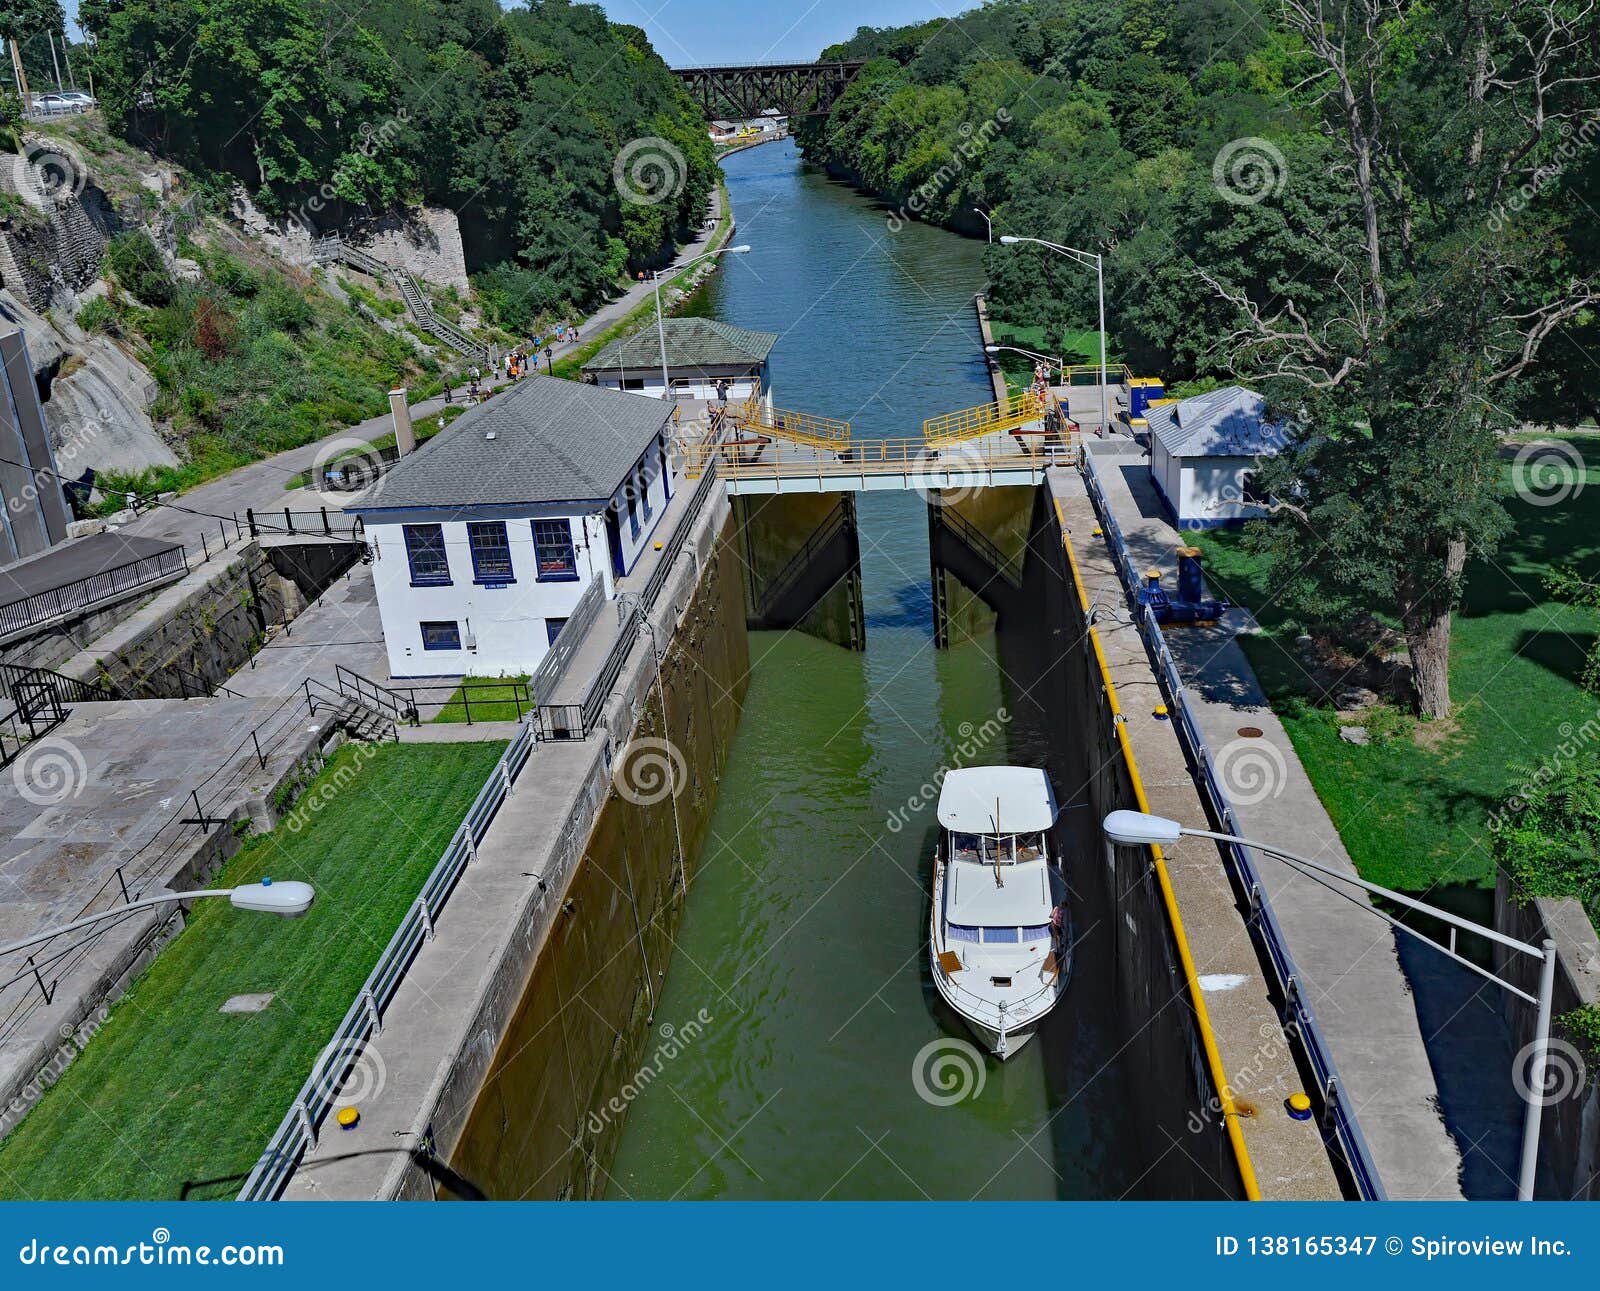 lock gate with boat on the erie canal